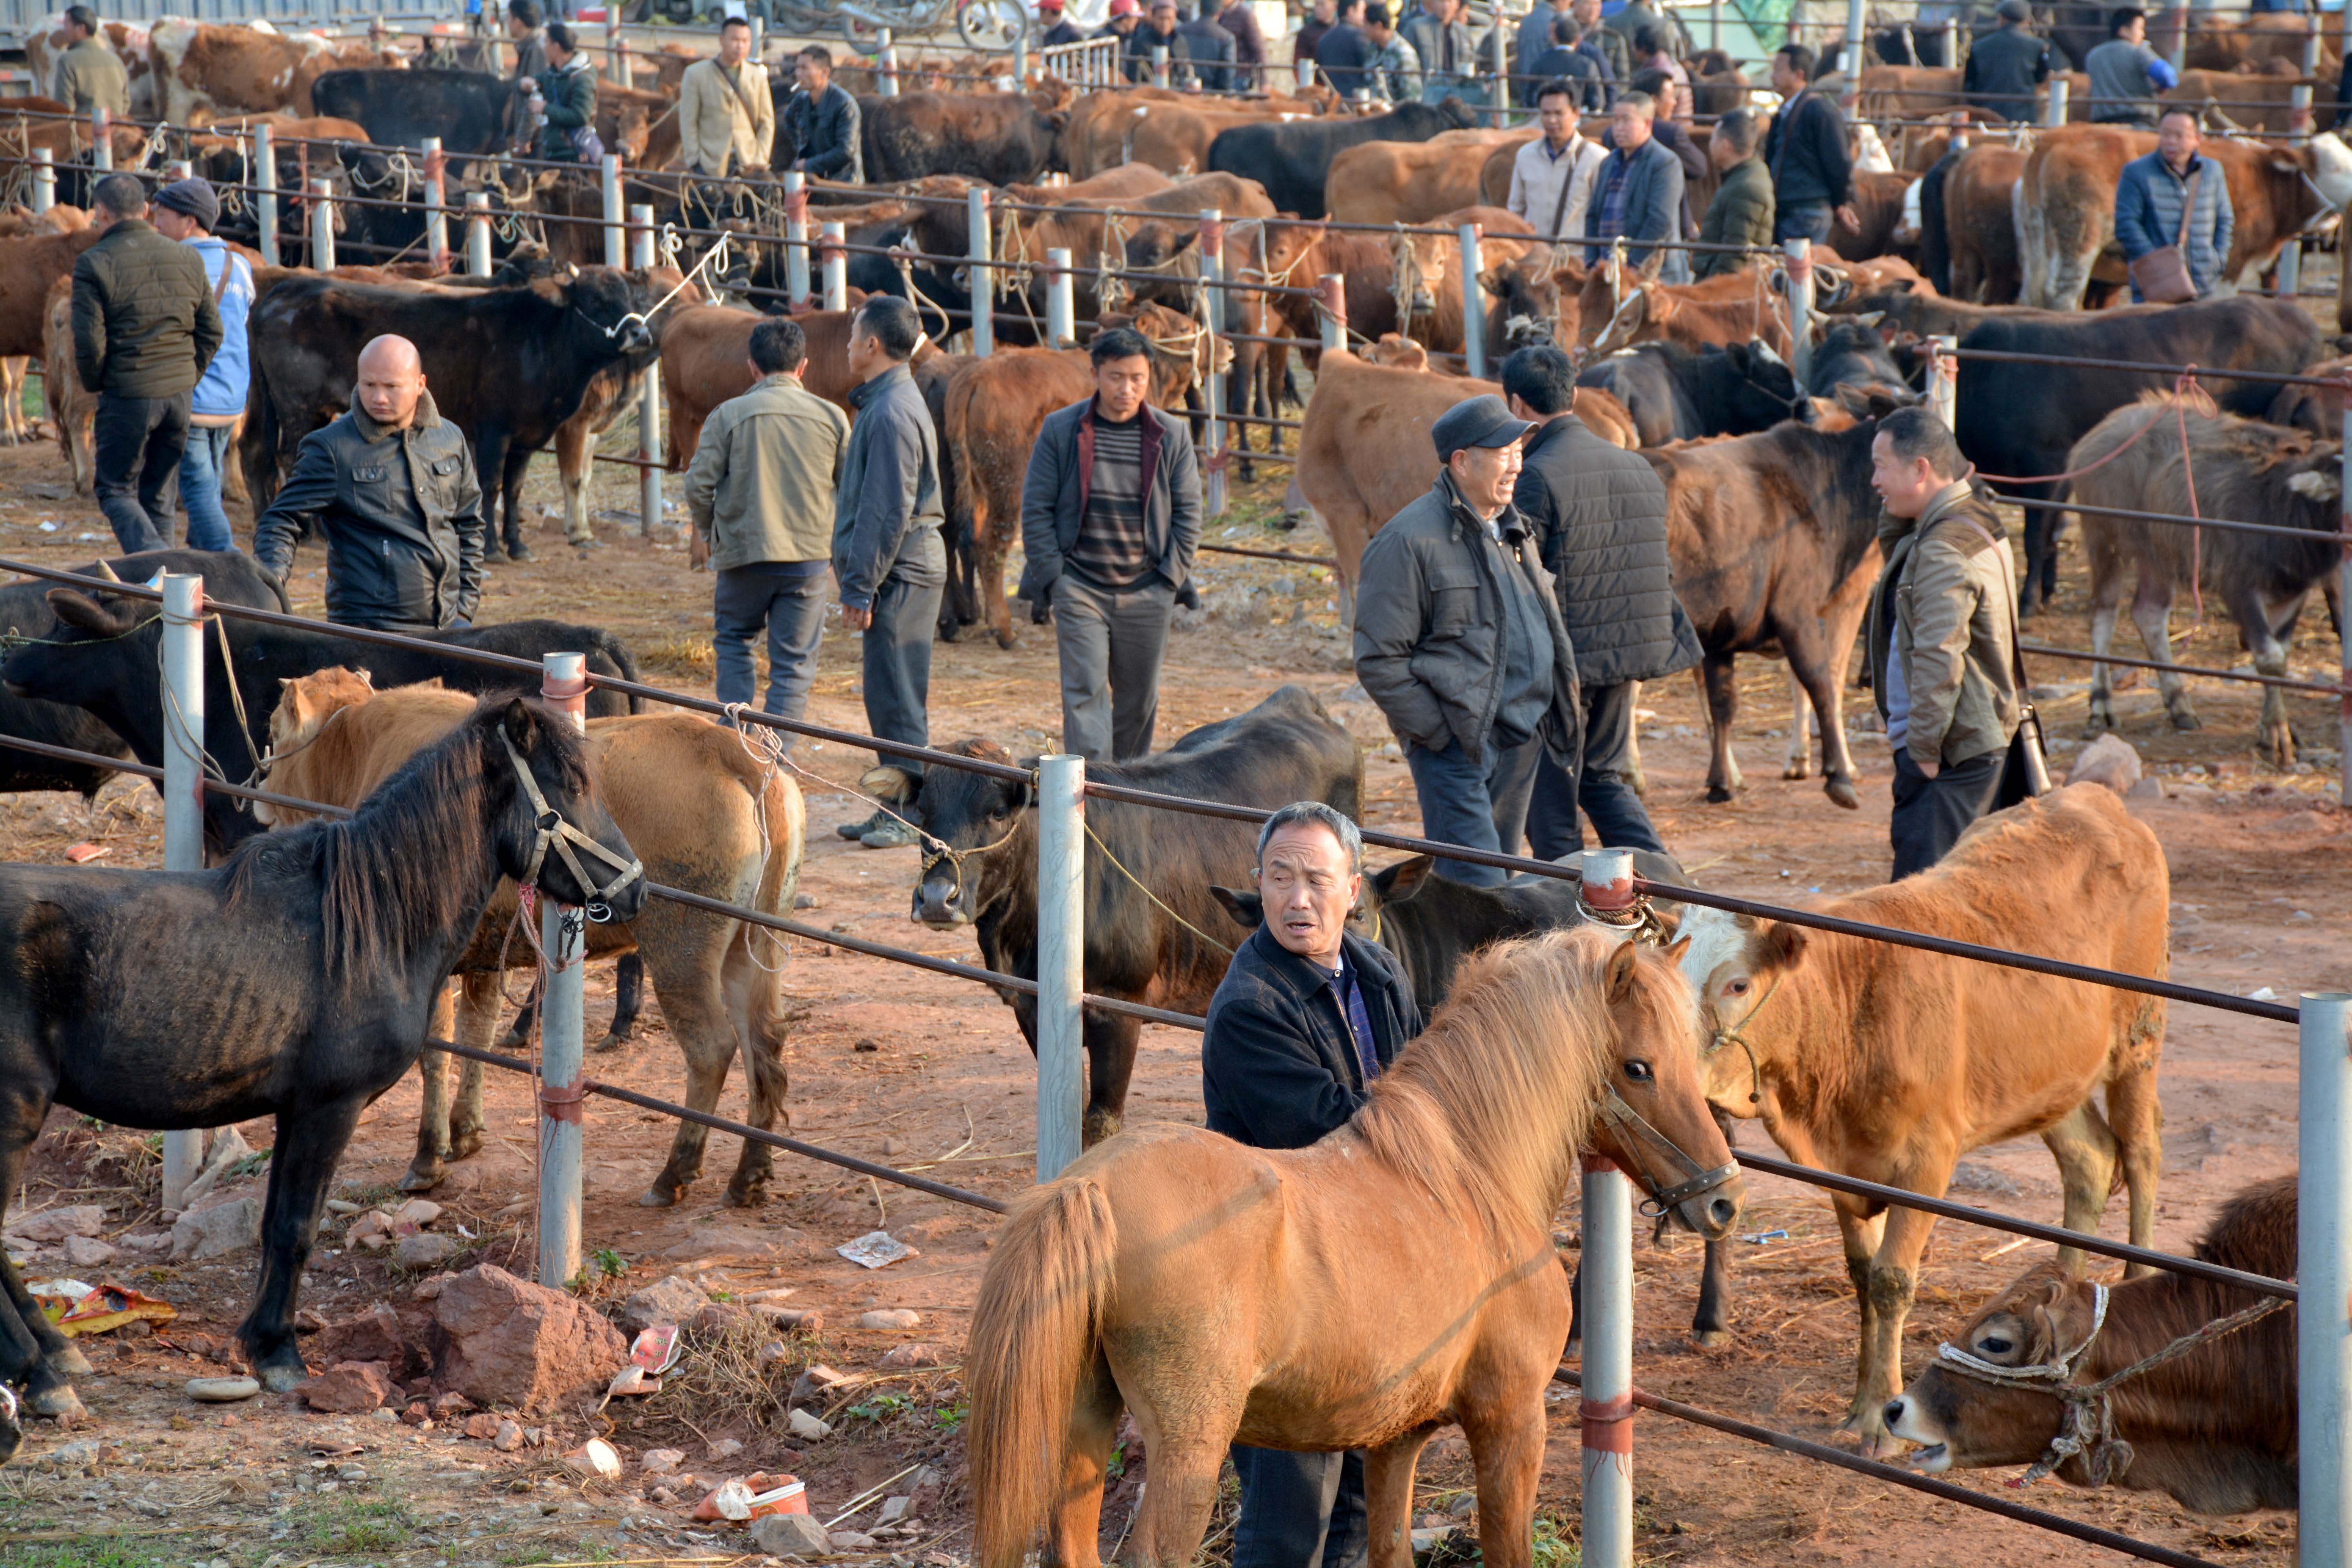 Farmers shop for cows at a cattle market in Rongjiang, Guizhou